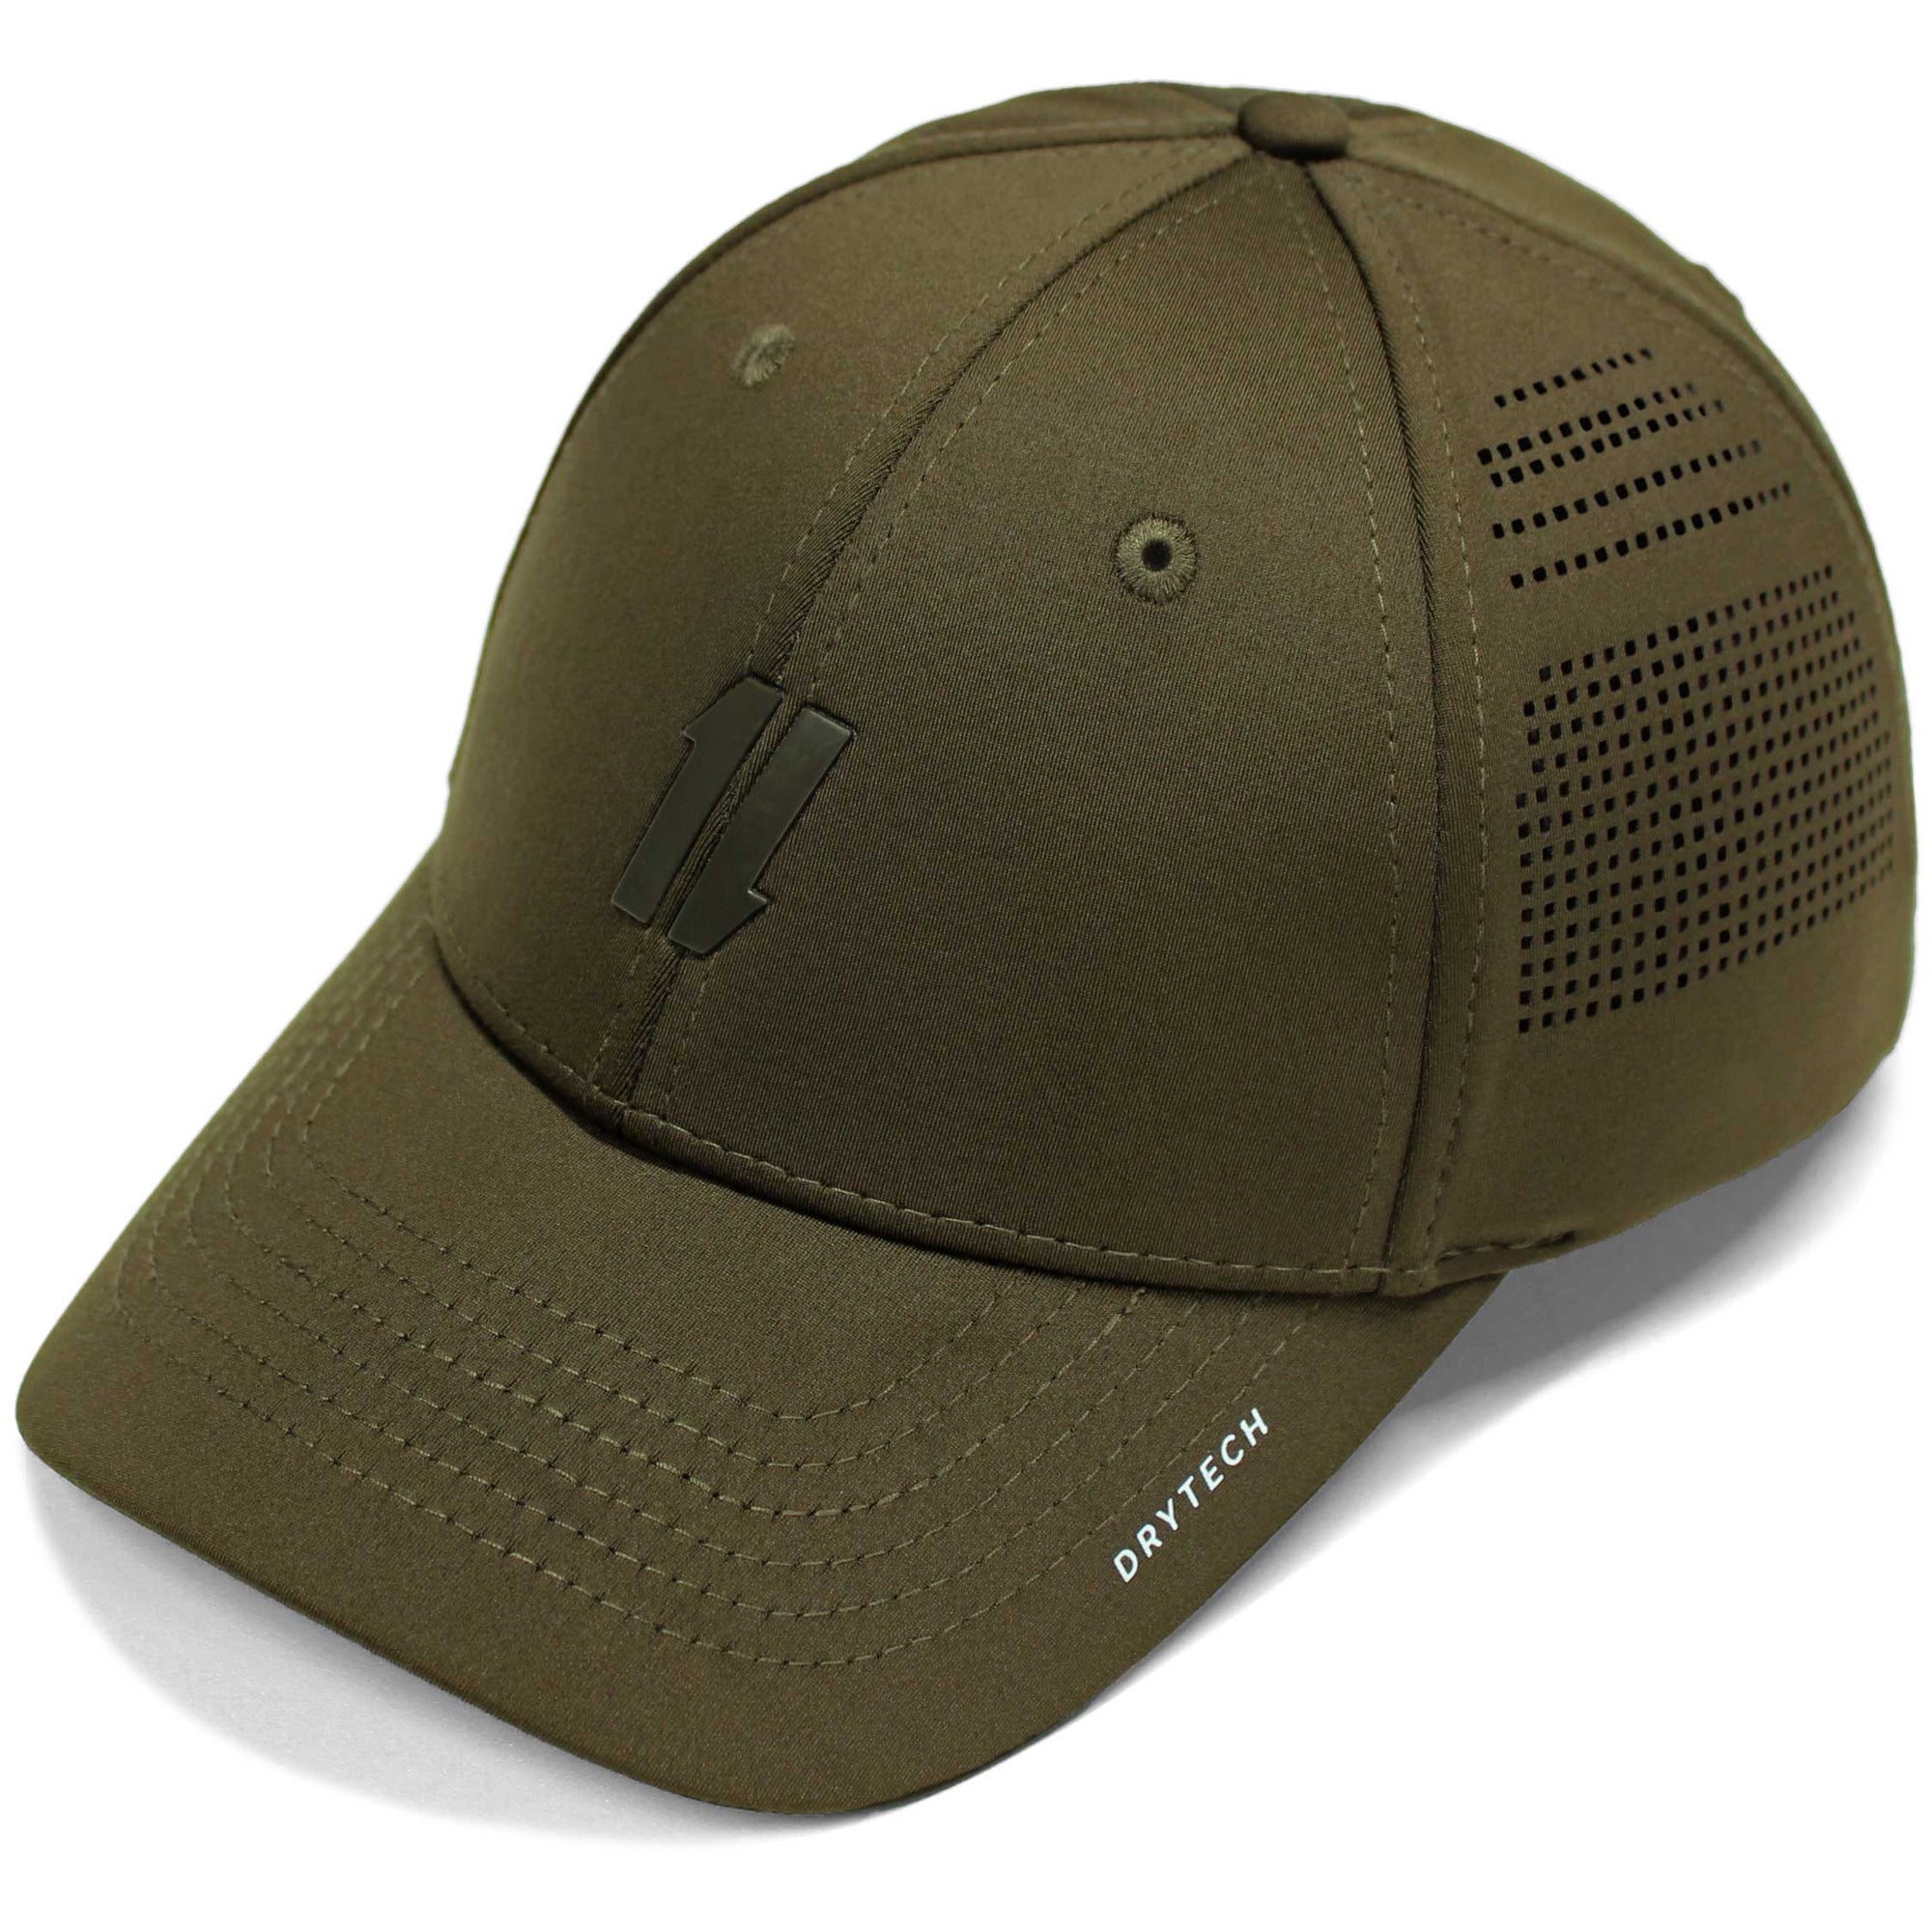 Mens Workout Hats & Athletic Hats by K&F  Shop Performance Gym Hats - King  and Fifth Supply Co.